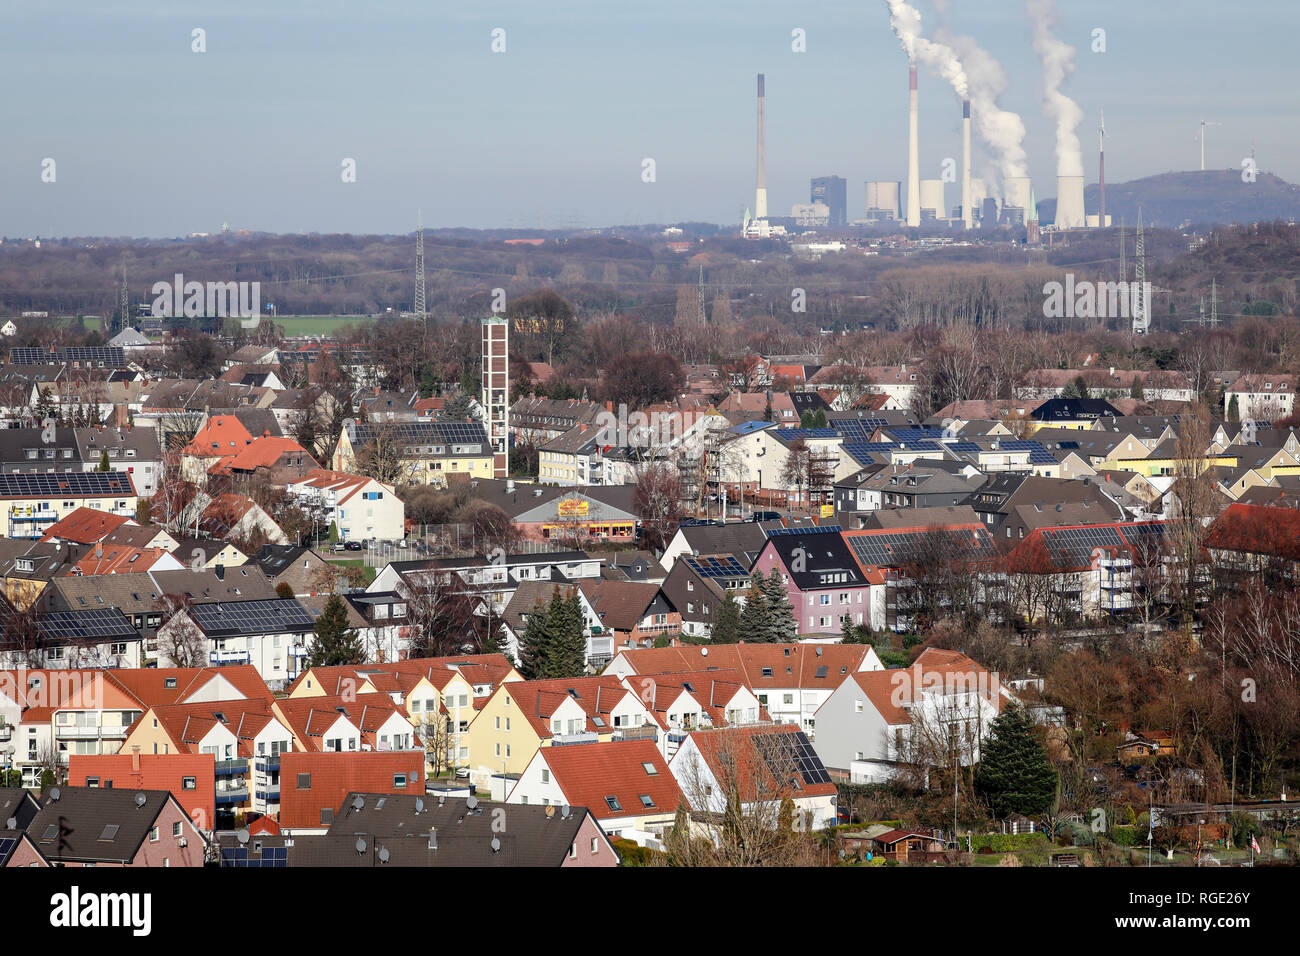 Bottrop, Ruhr area, North Rhine-Westphalia, Germany - Bottrop, housing estate with many solar roofs, behind the Scholven power plant, a power plant of Stock Photo